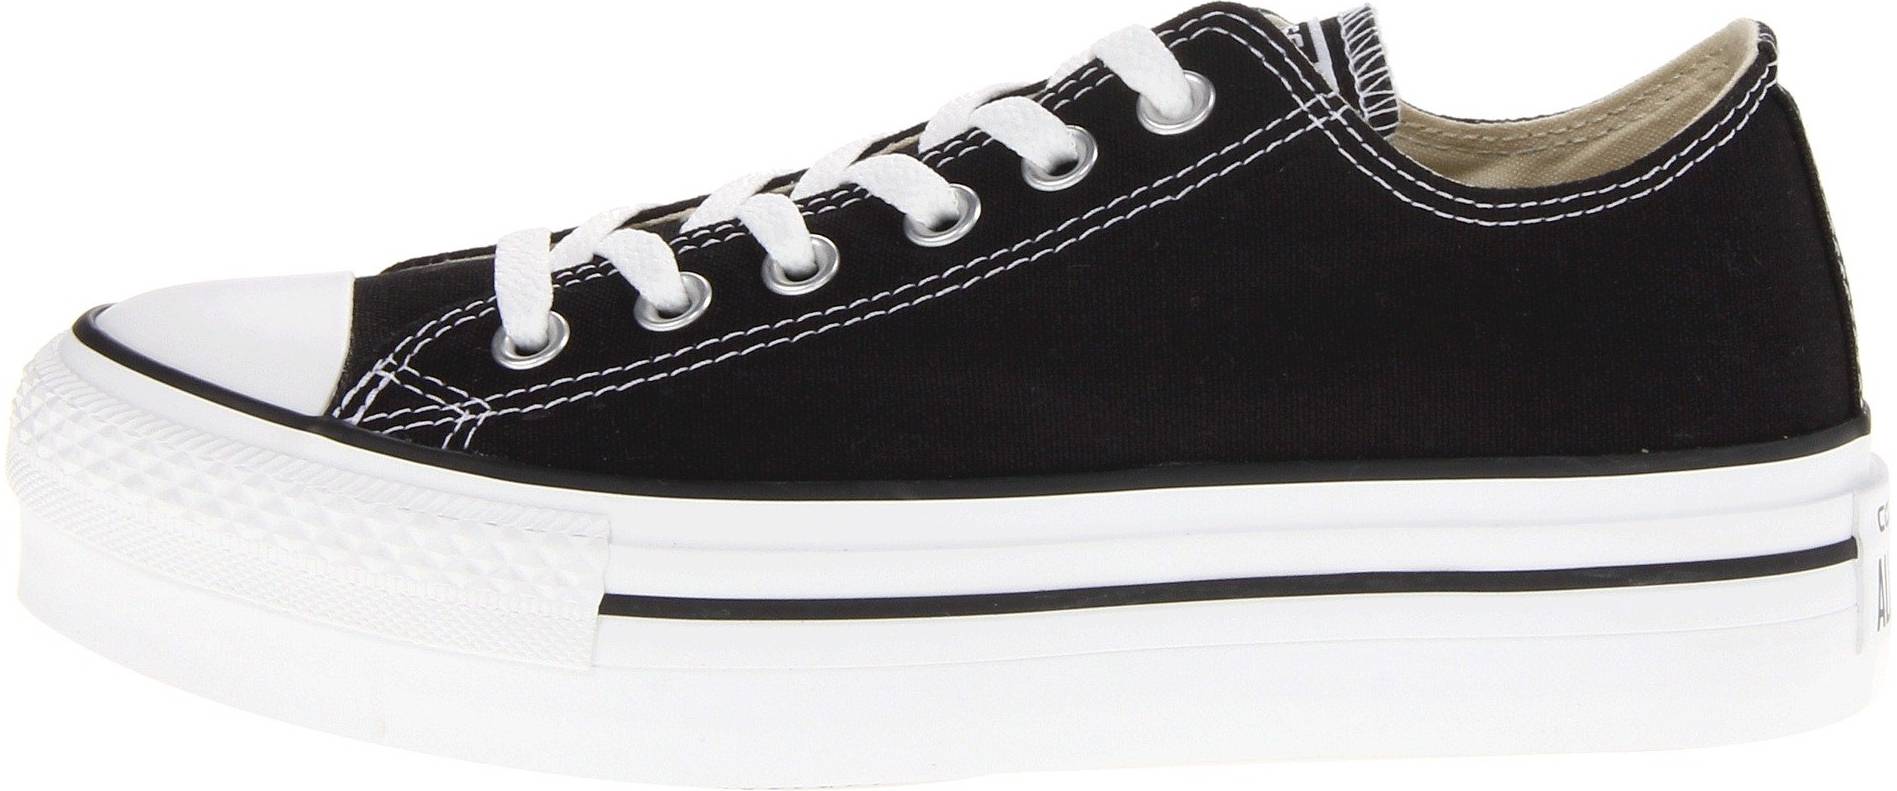 Only $45 + Review of Converse Chuck 